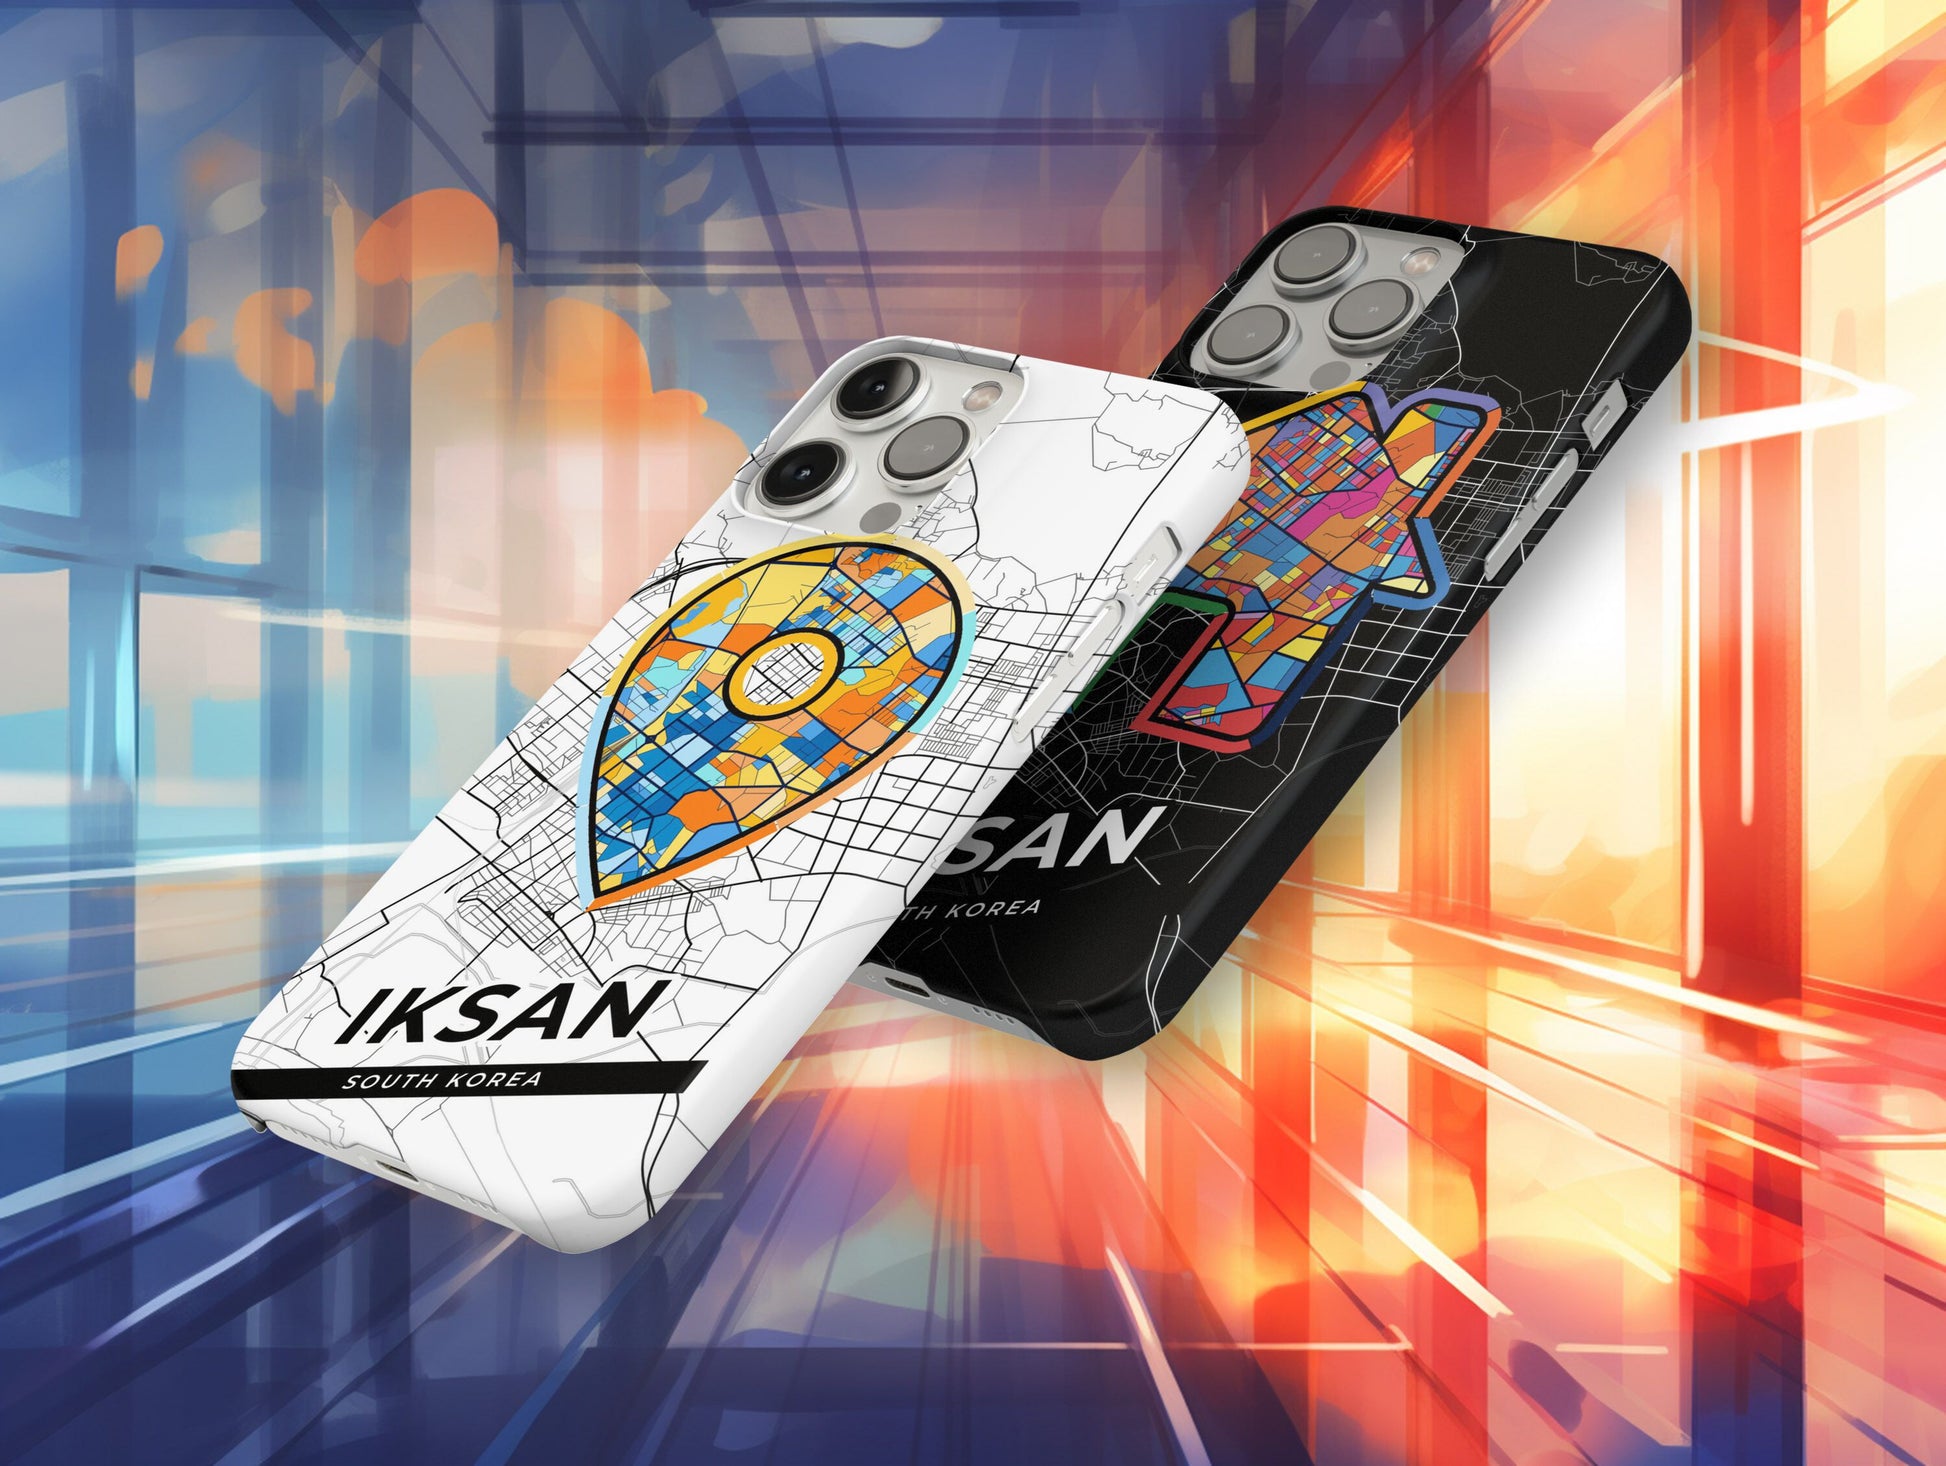 Iksan South Korea slim phone case with colorful icon. Birthday, wedding or housewarming gift. Couple match cases.